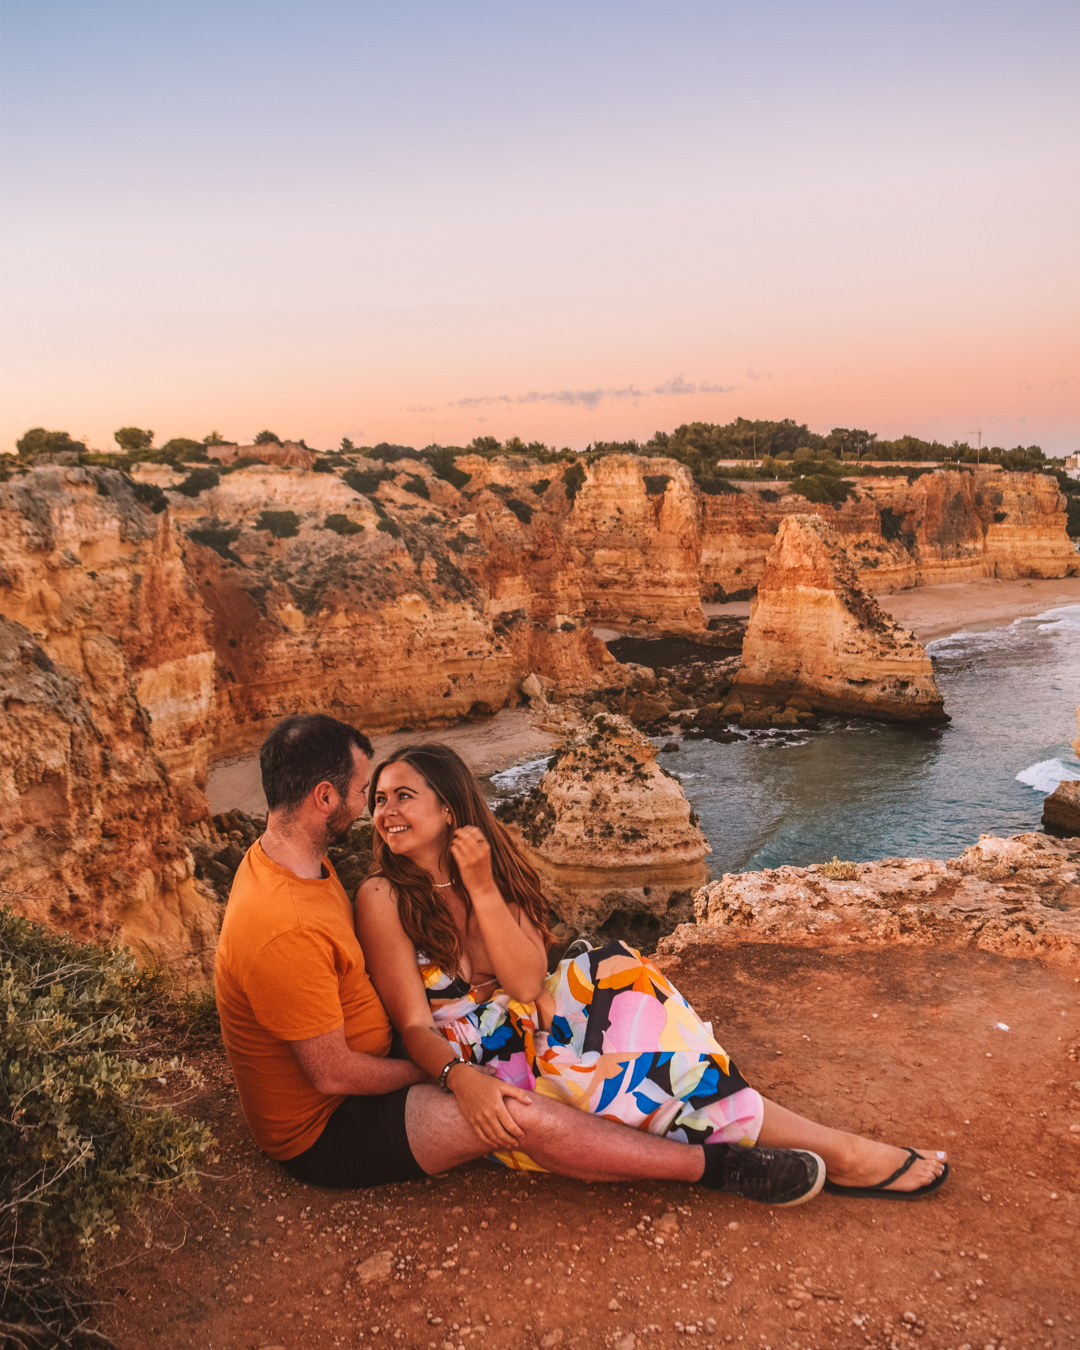 Top spots to visit in the Algarve, best view over Praia da Marinha at sunset